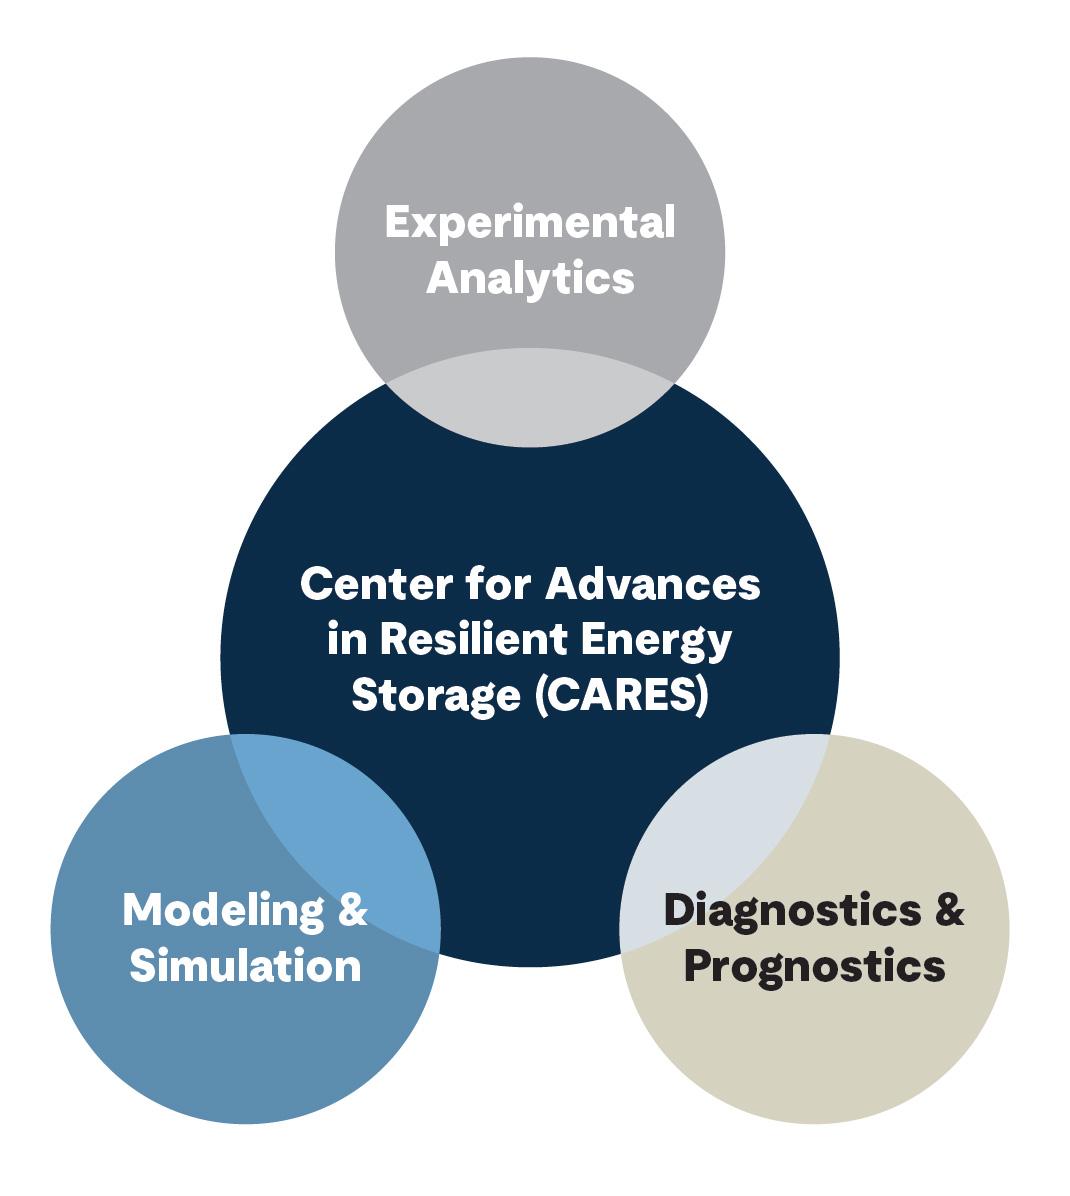 Center for Advances in Resilient Energy Storage (CARES)